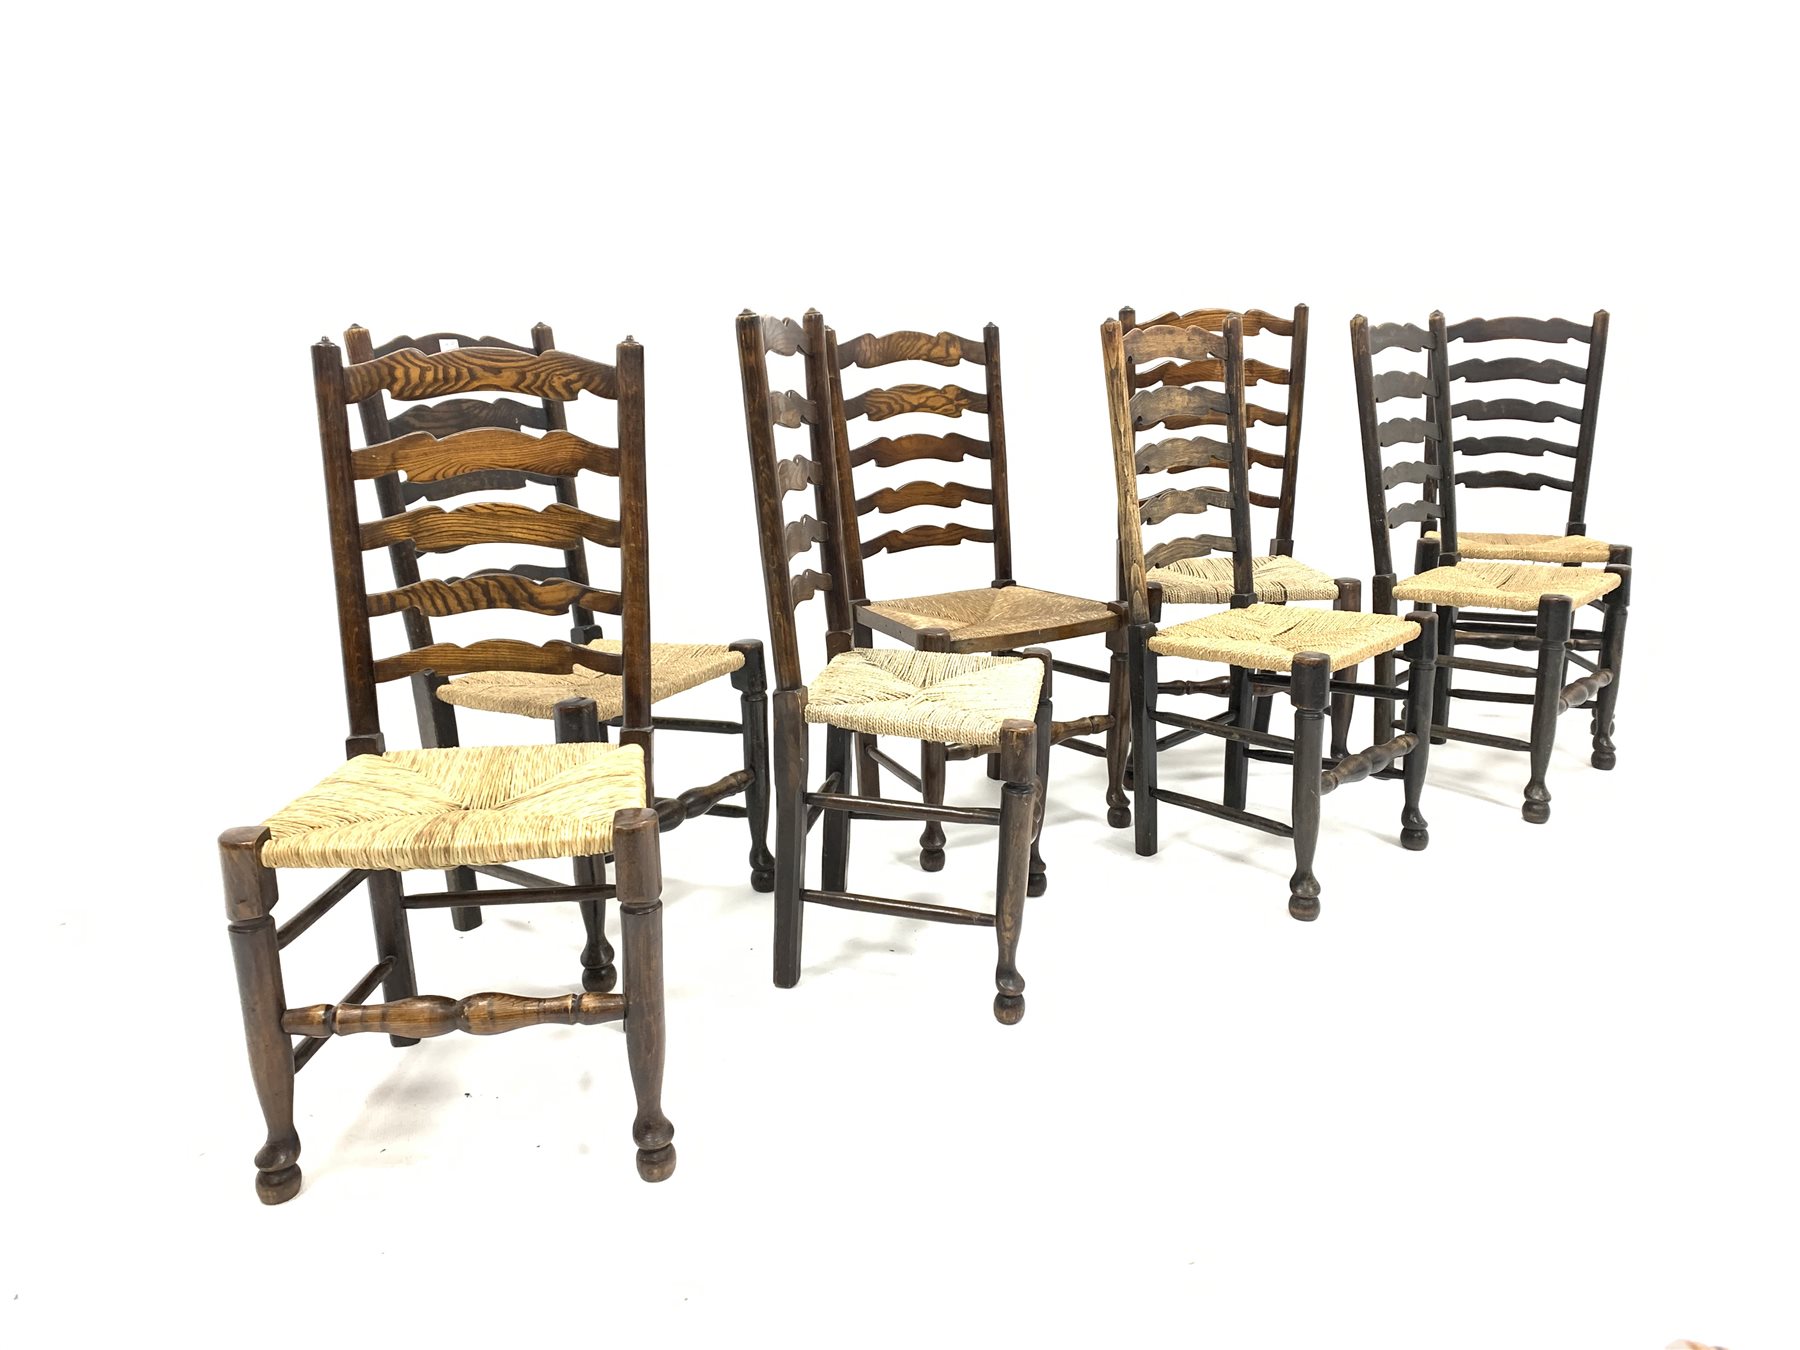 Harlequin set of eight 19th century oak ladder back chairs, with rush seats and turned supports, W49 - Image 2 of 3